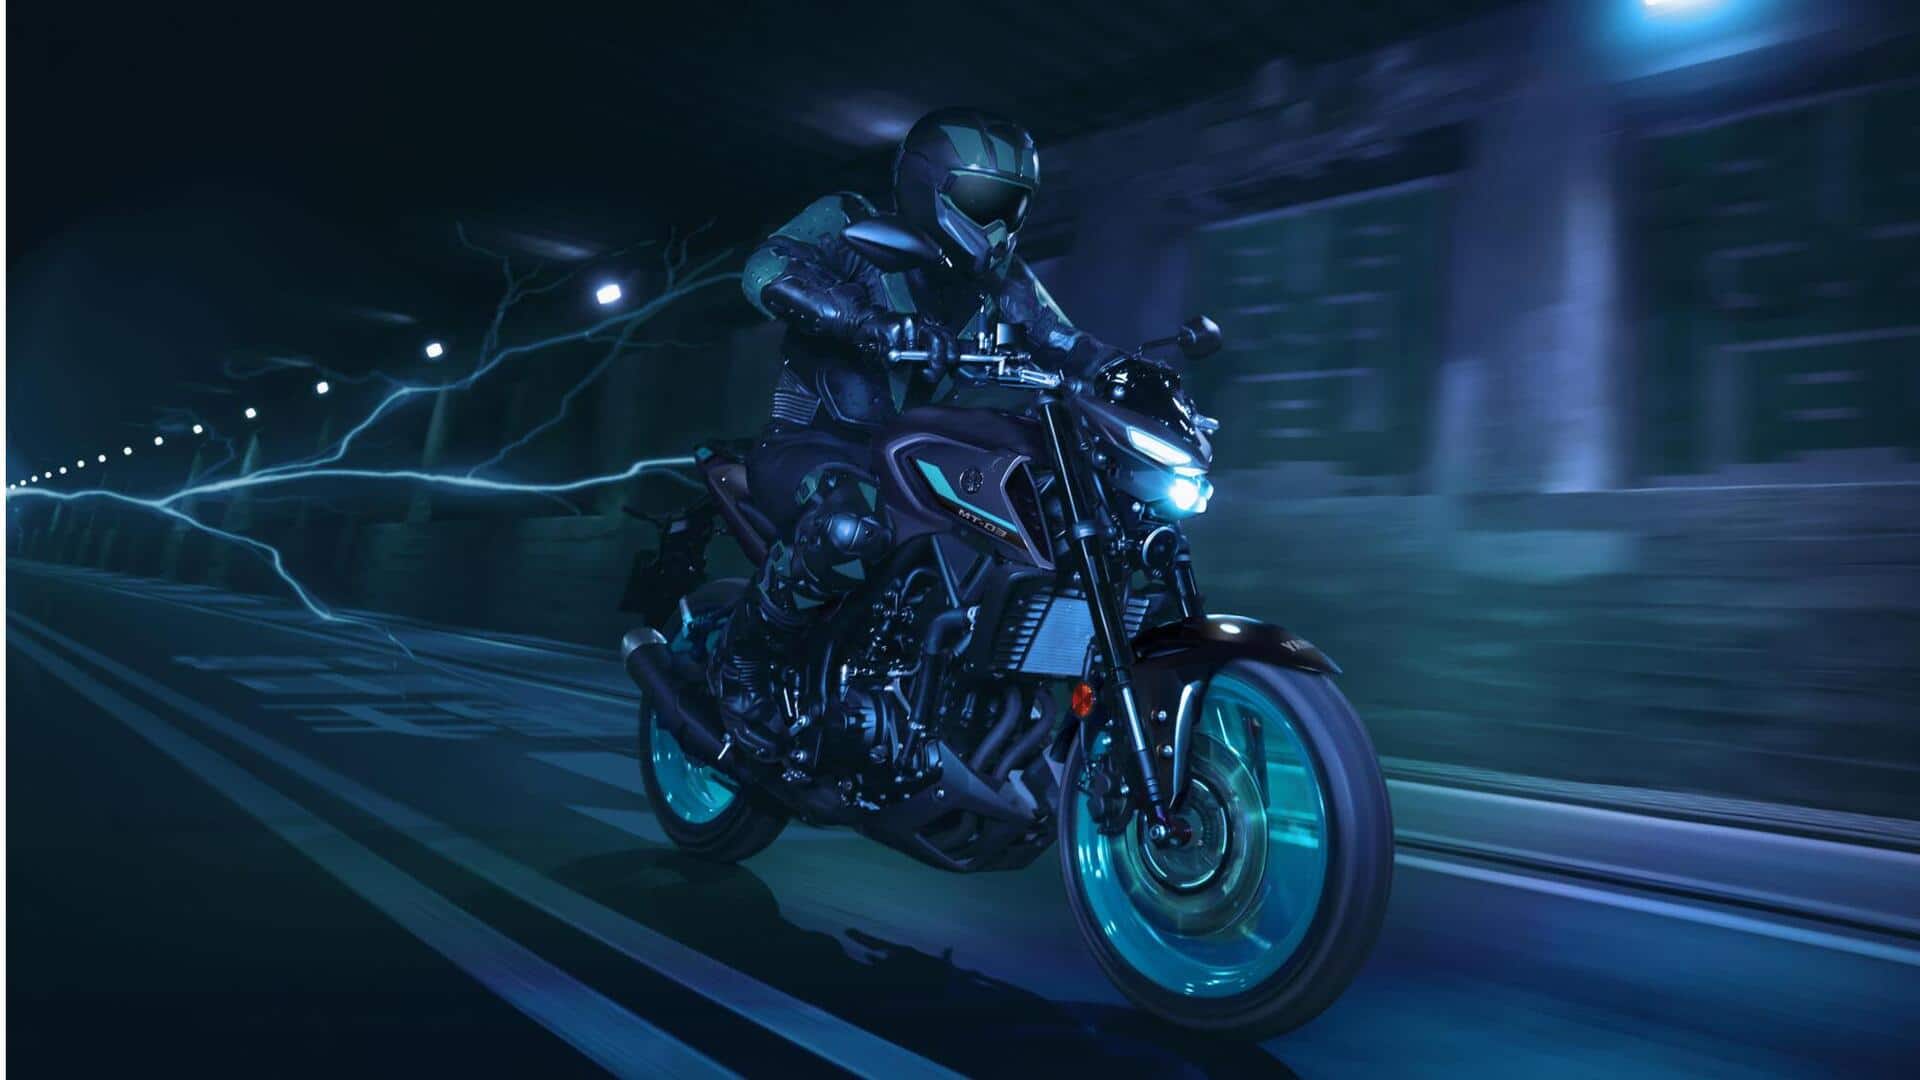 Yamaha MT-03 goes official at Rs. 4.6 lakh: Check features